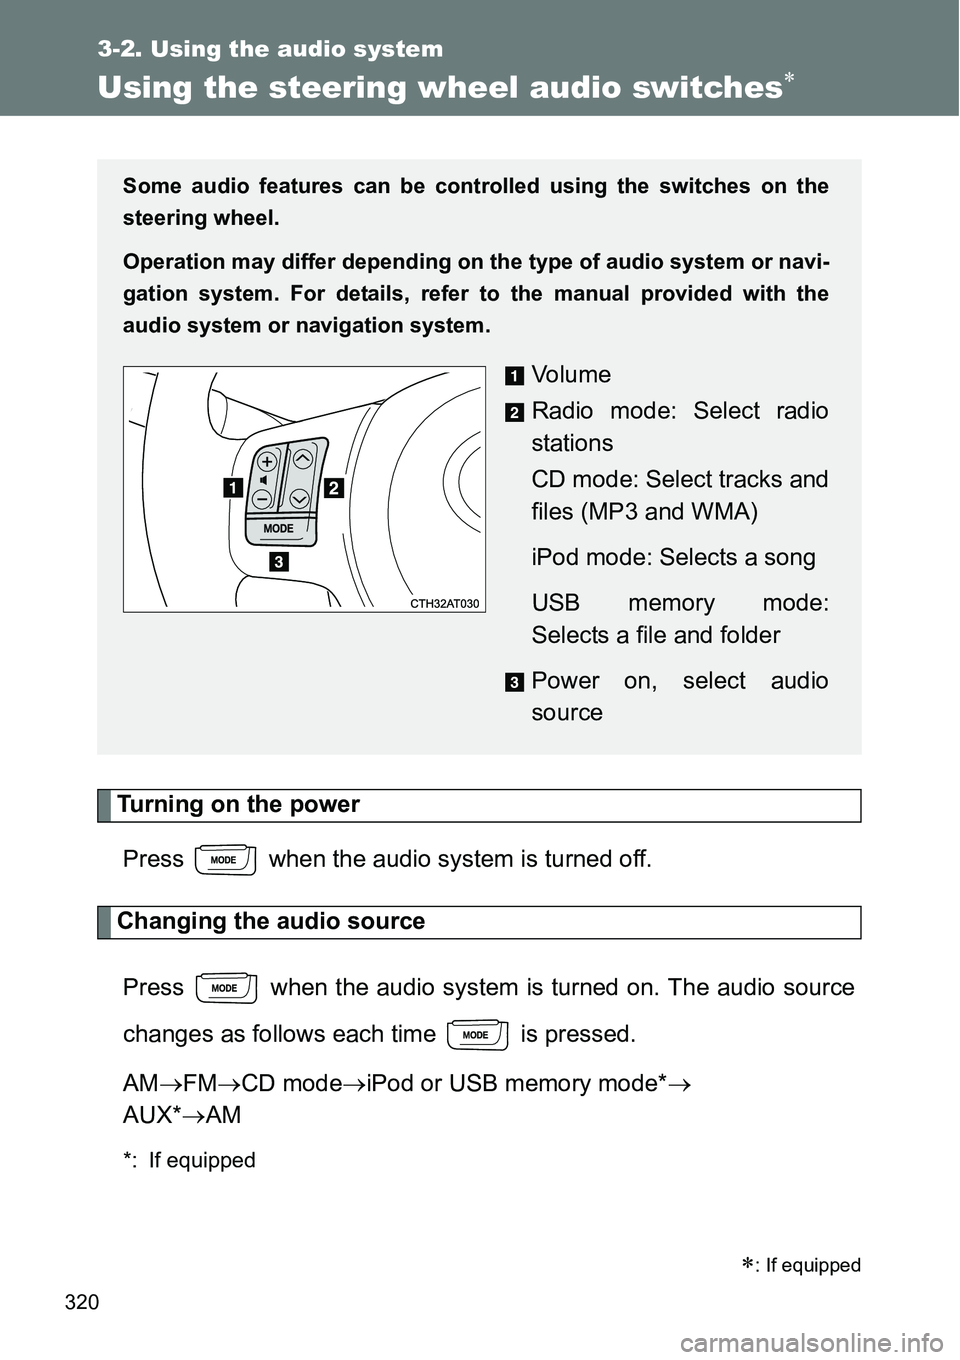 TOYOTA VERSO S 2015  Owners Manual 320
3-2. Using the audio system
Using the steering wheel audio switches
Turning on the power
Press   when the audio system is turned off.
Changing the audio source
Press   when the audio system is 